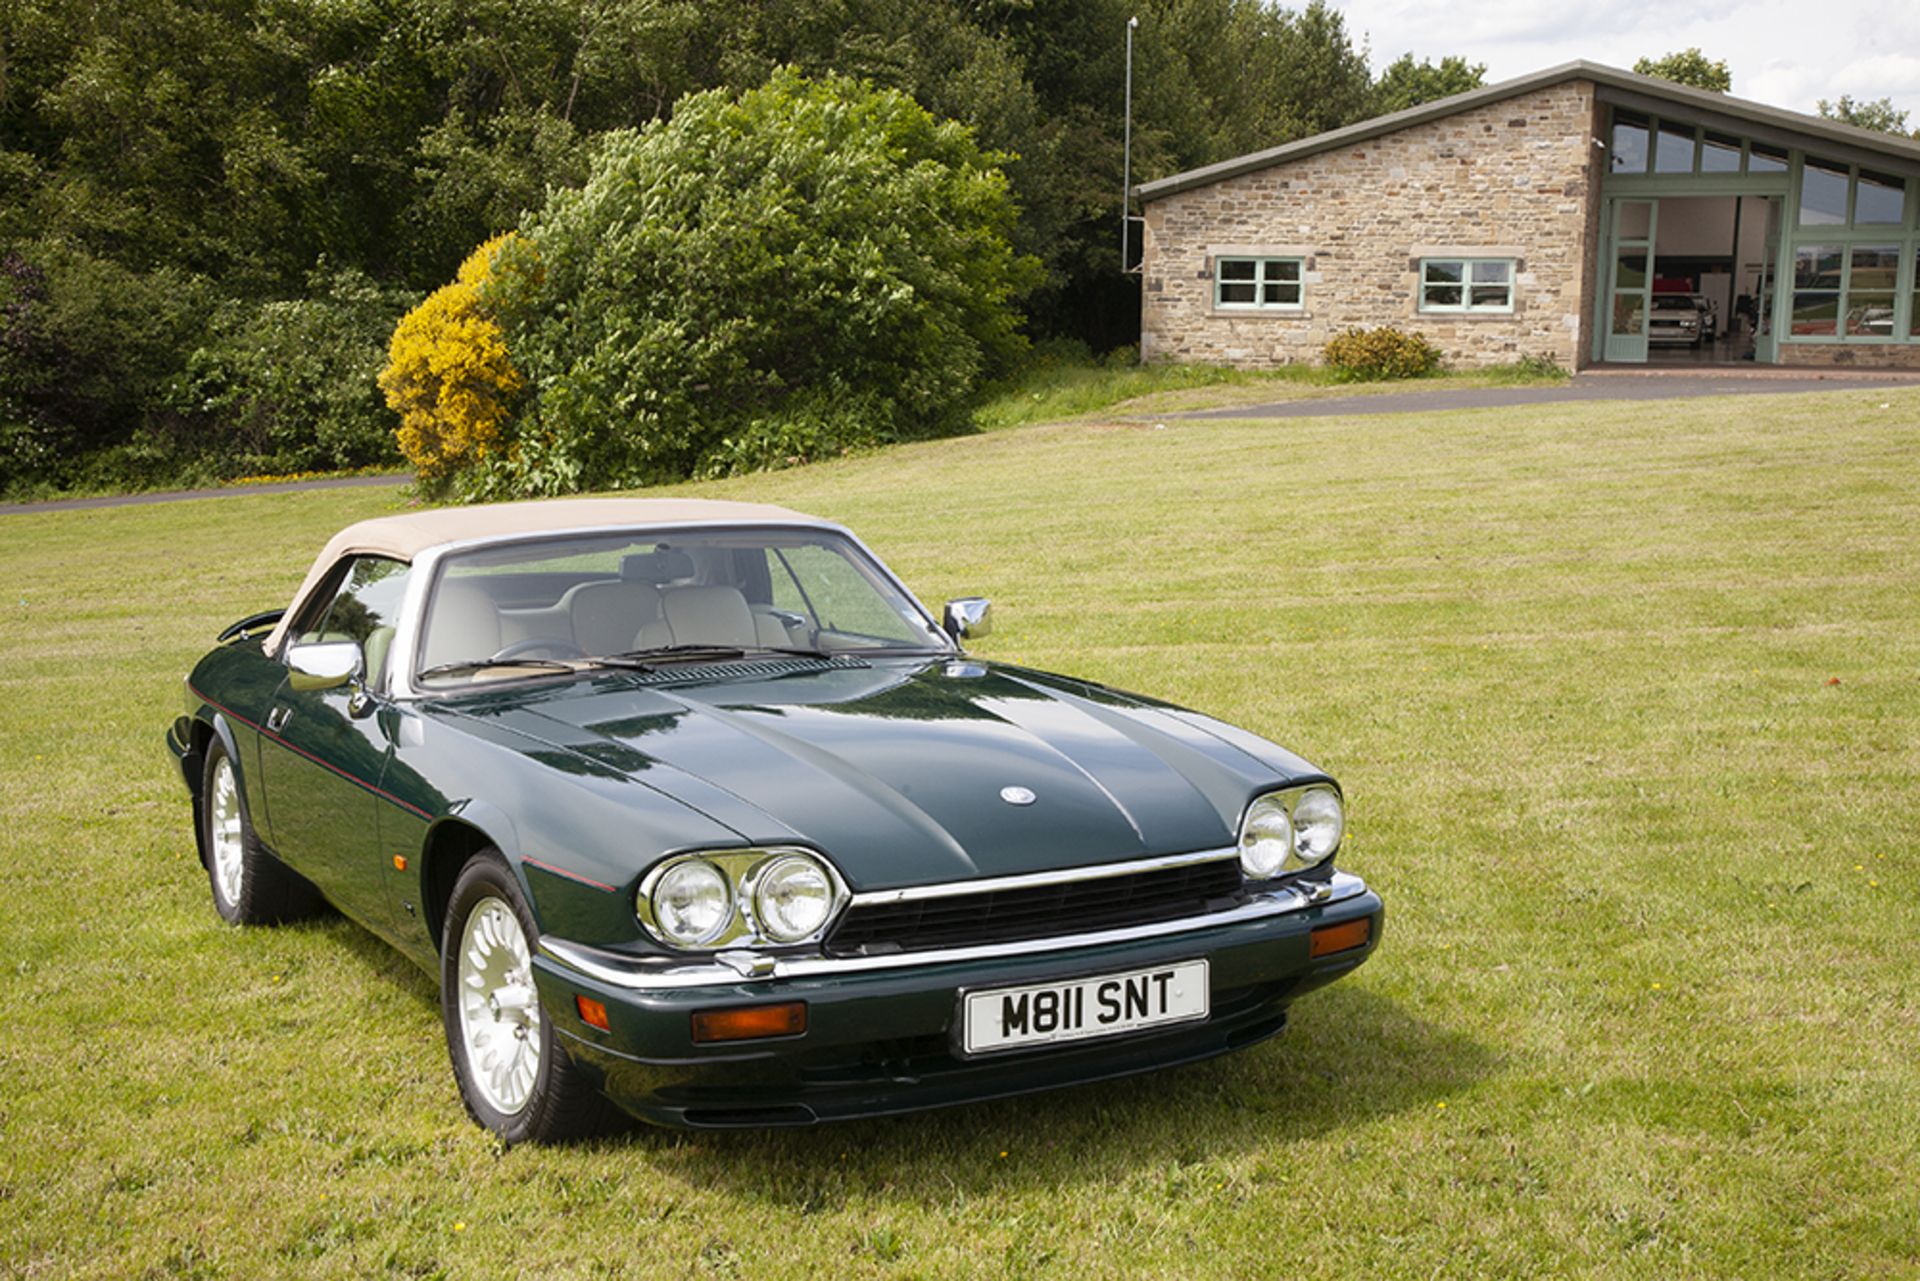 1994 Jaguar XJS V12 Convertible - in fine condition - Image 2 of 13